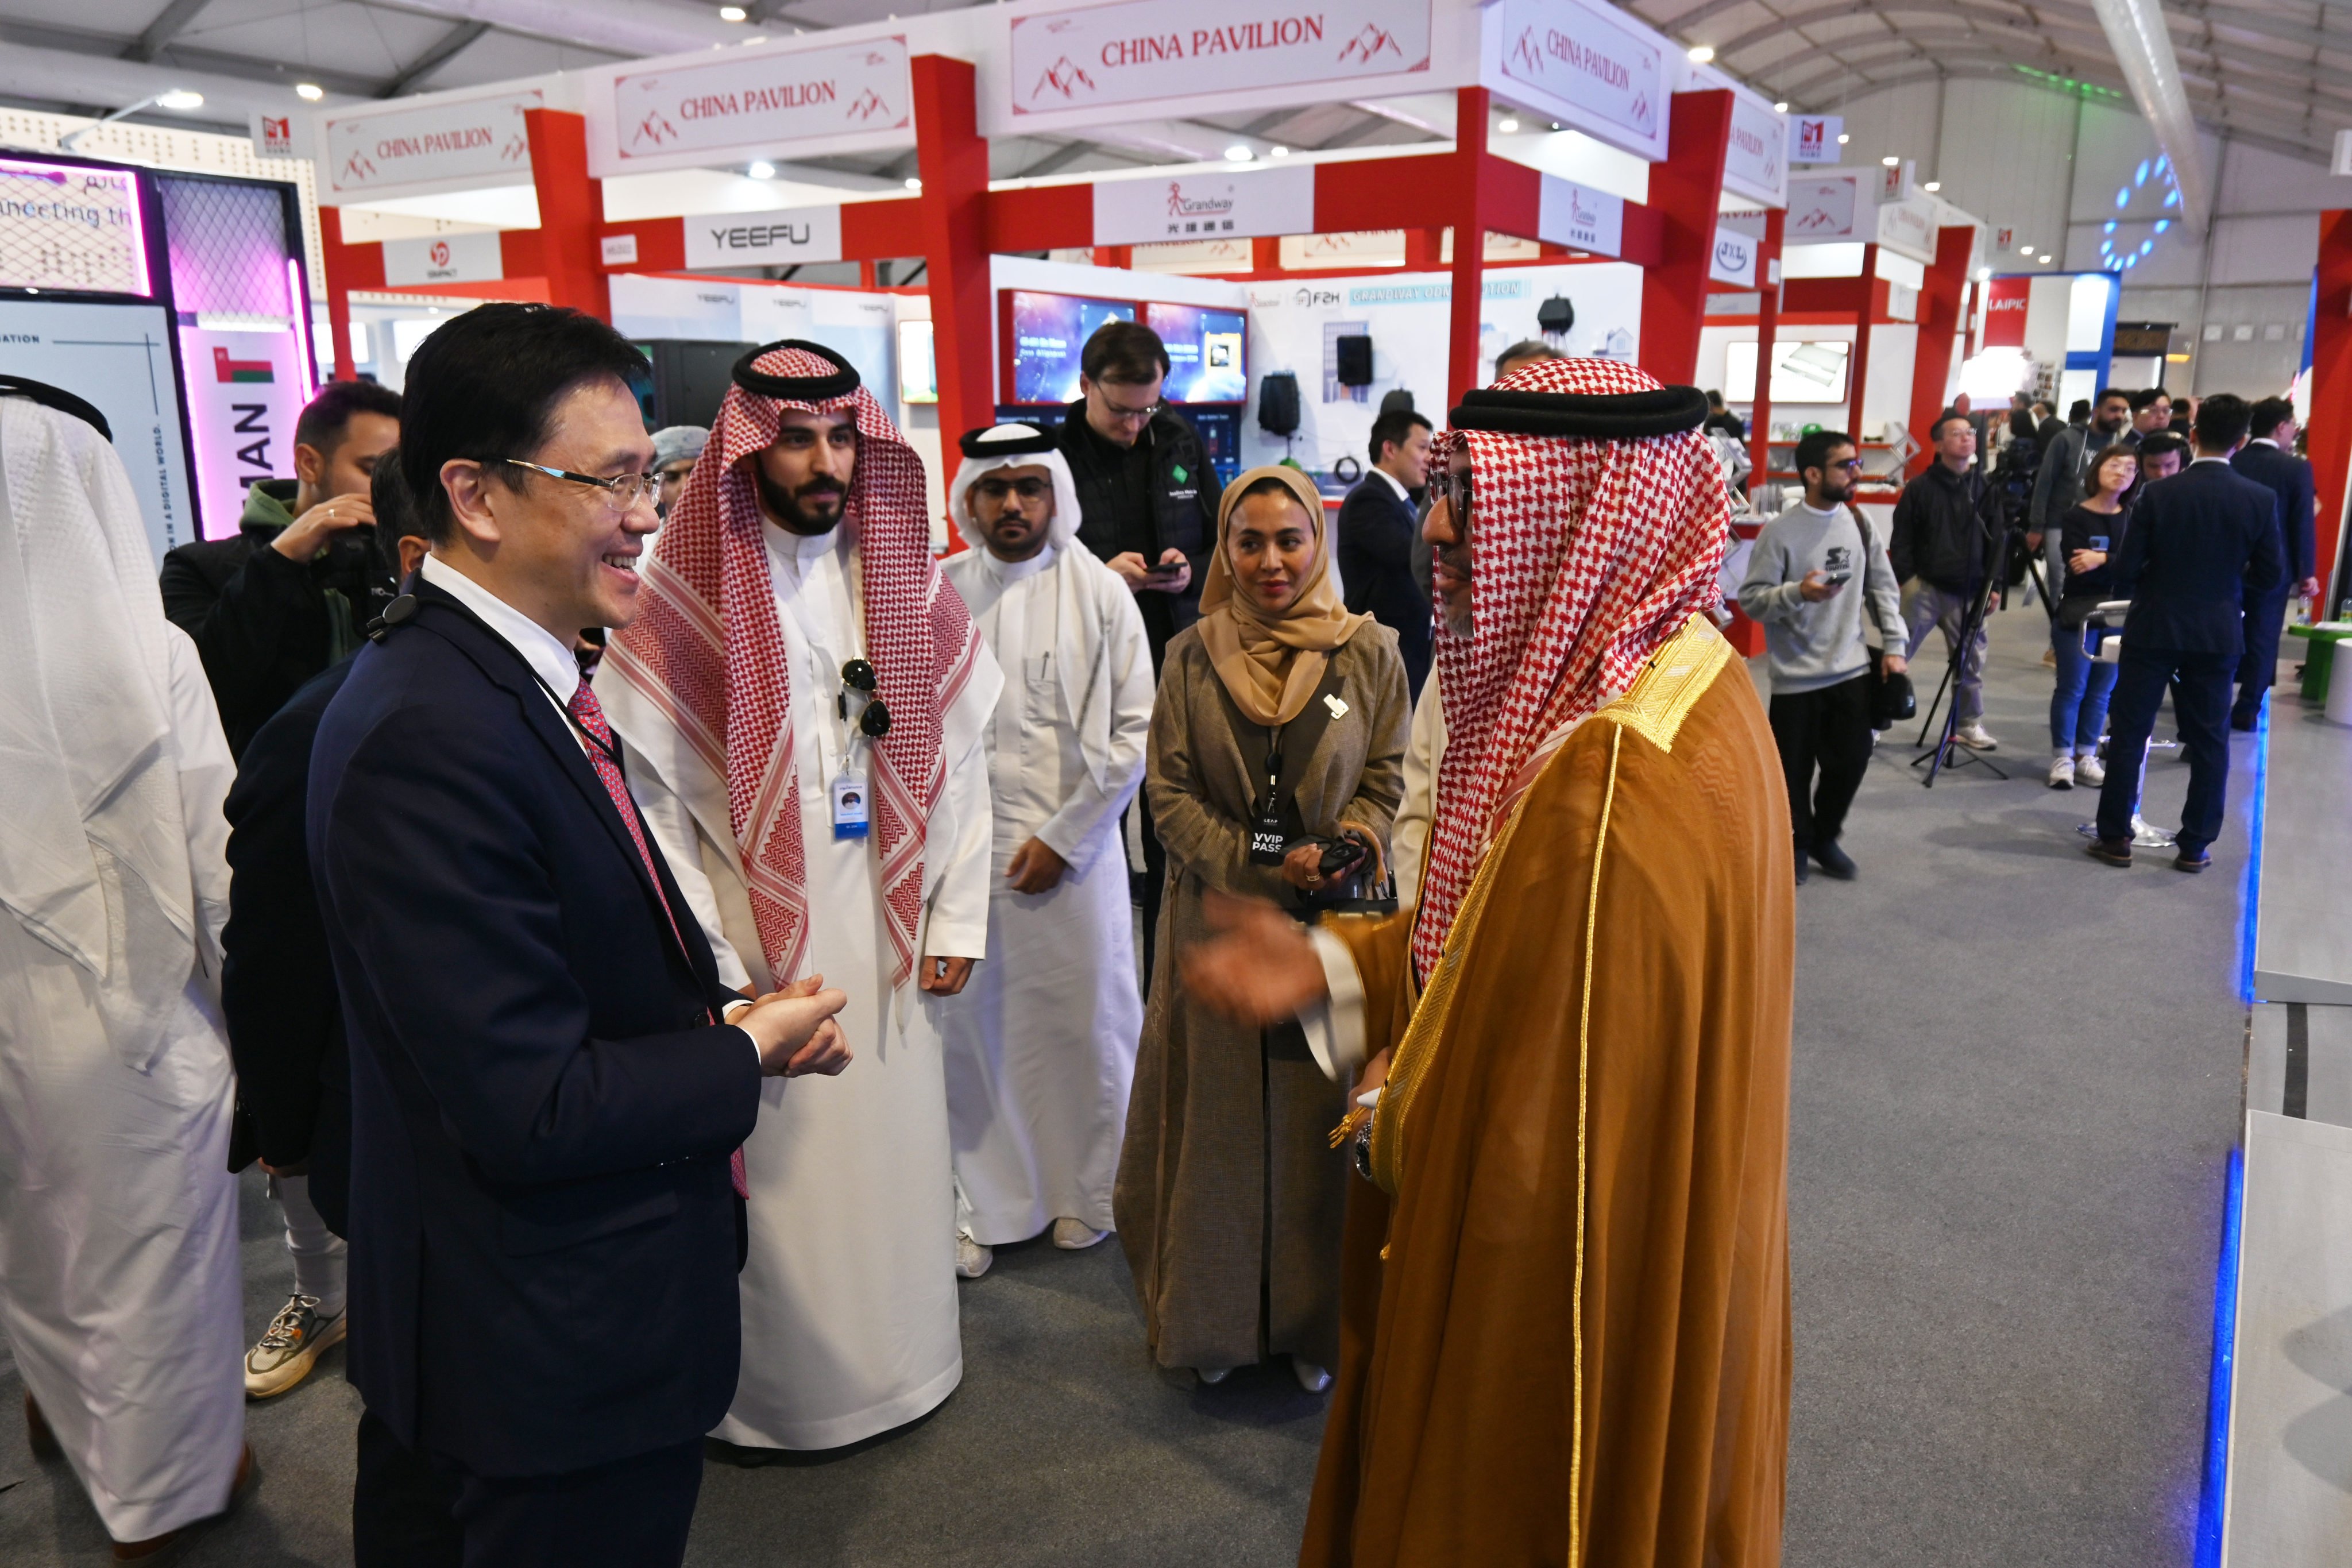 Secretary for Innovation, Technology and Industry Sun Dong talks with Saudi Arabia’s Vice-Governor of the Research, Development and Innovation Authority Abdulrahman Alsufvani at the Leap conference in Riyadh, Saudi Arabia, on March 4, 2024. SCMP/ Matt Haldane